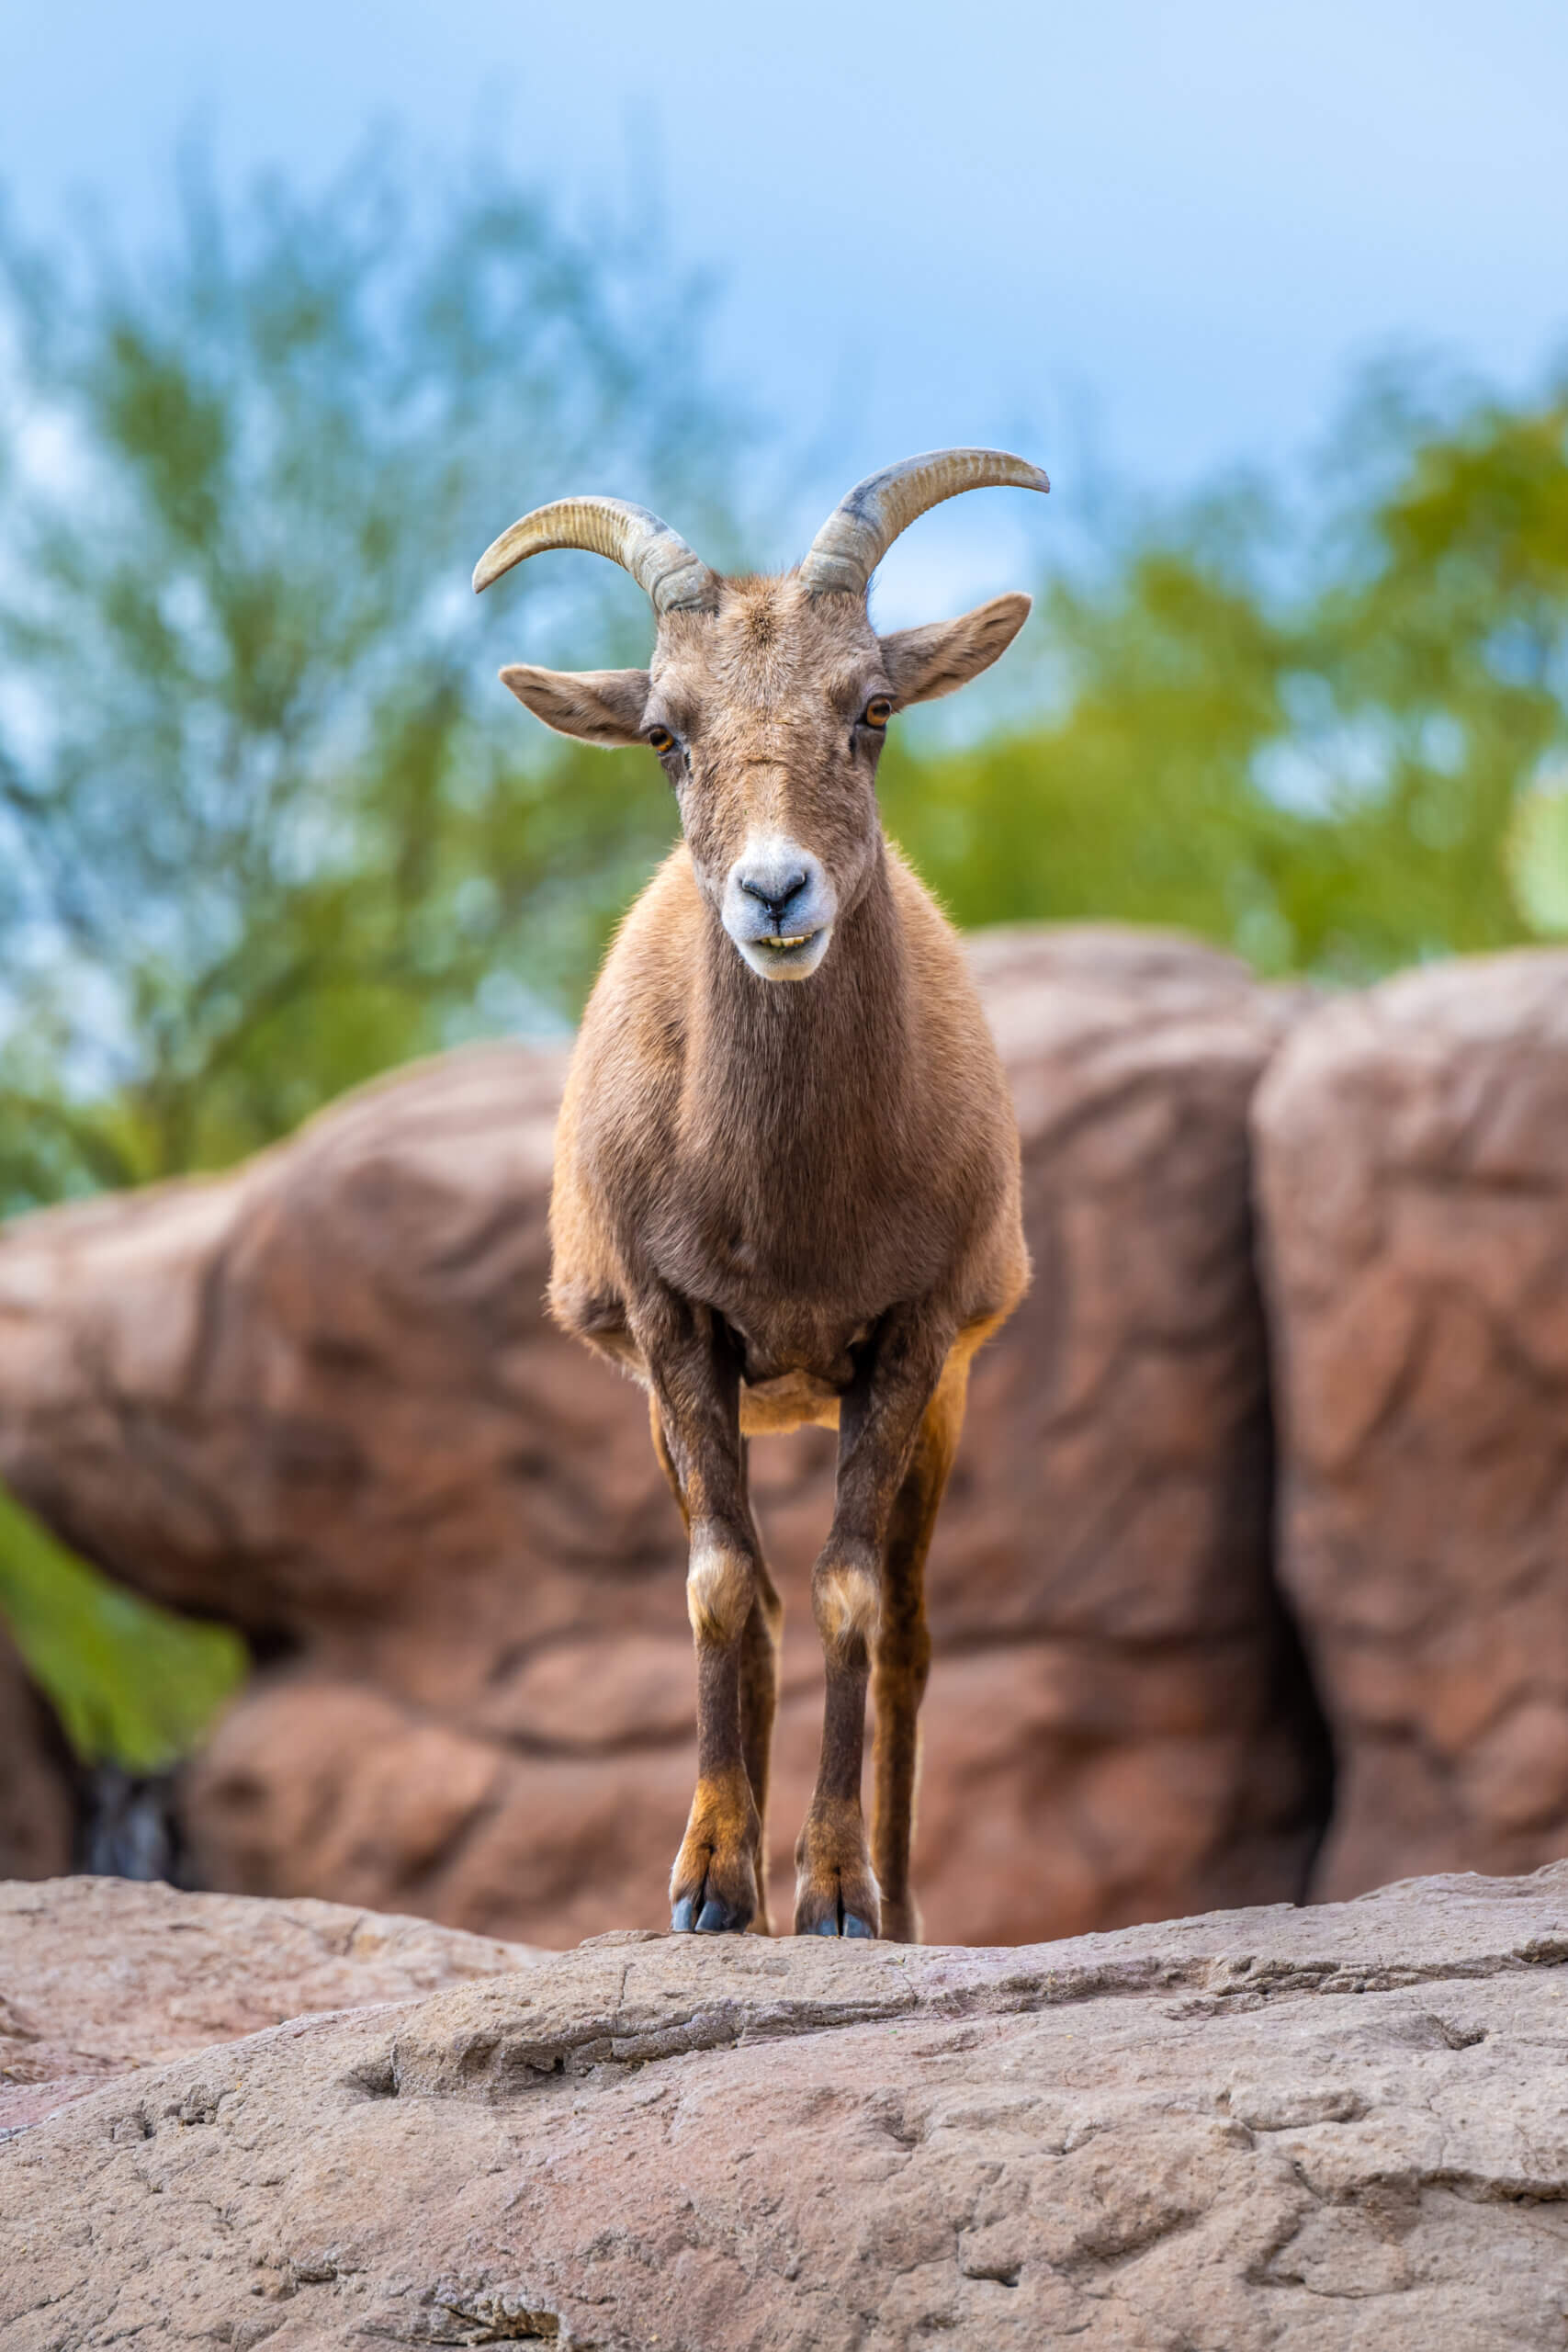 Resilient Horned Wanderer: Bighorn Sheep at the Sonoran Desert